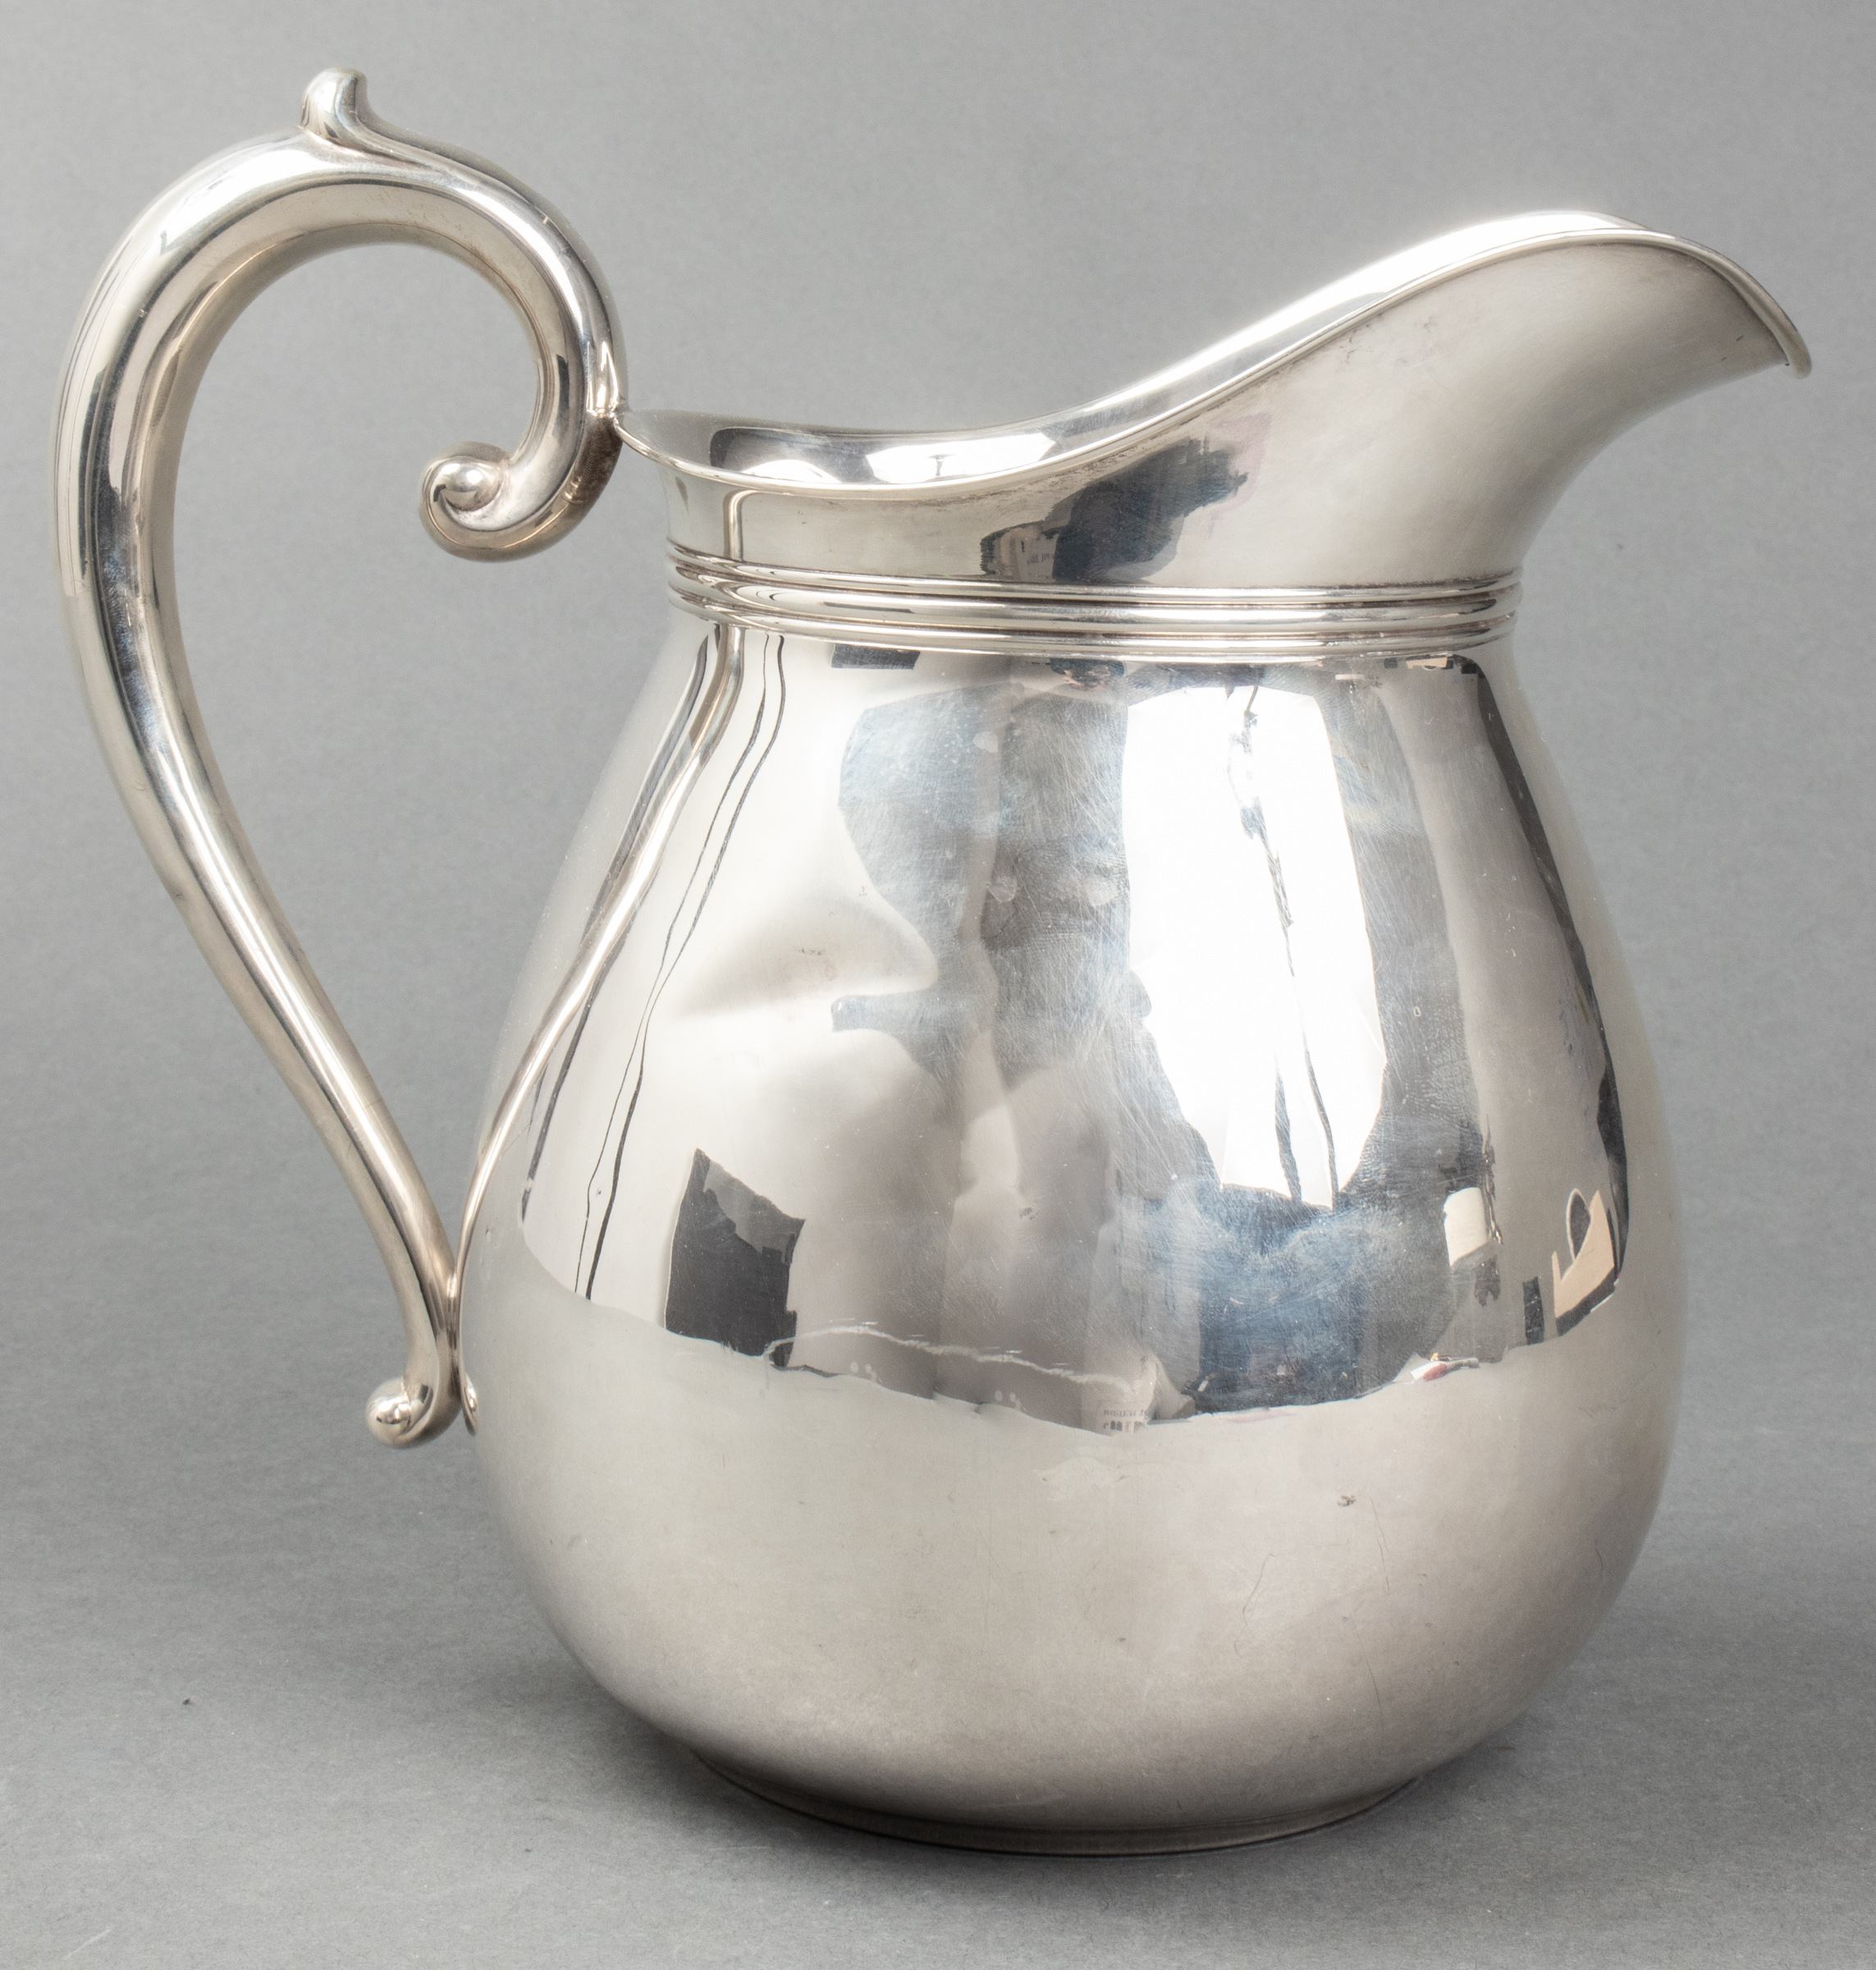 WALLACE STERLING SILVER WATER PITCHER 3c39e0